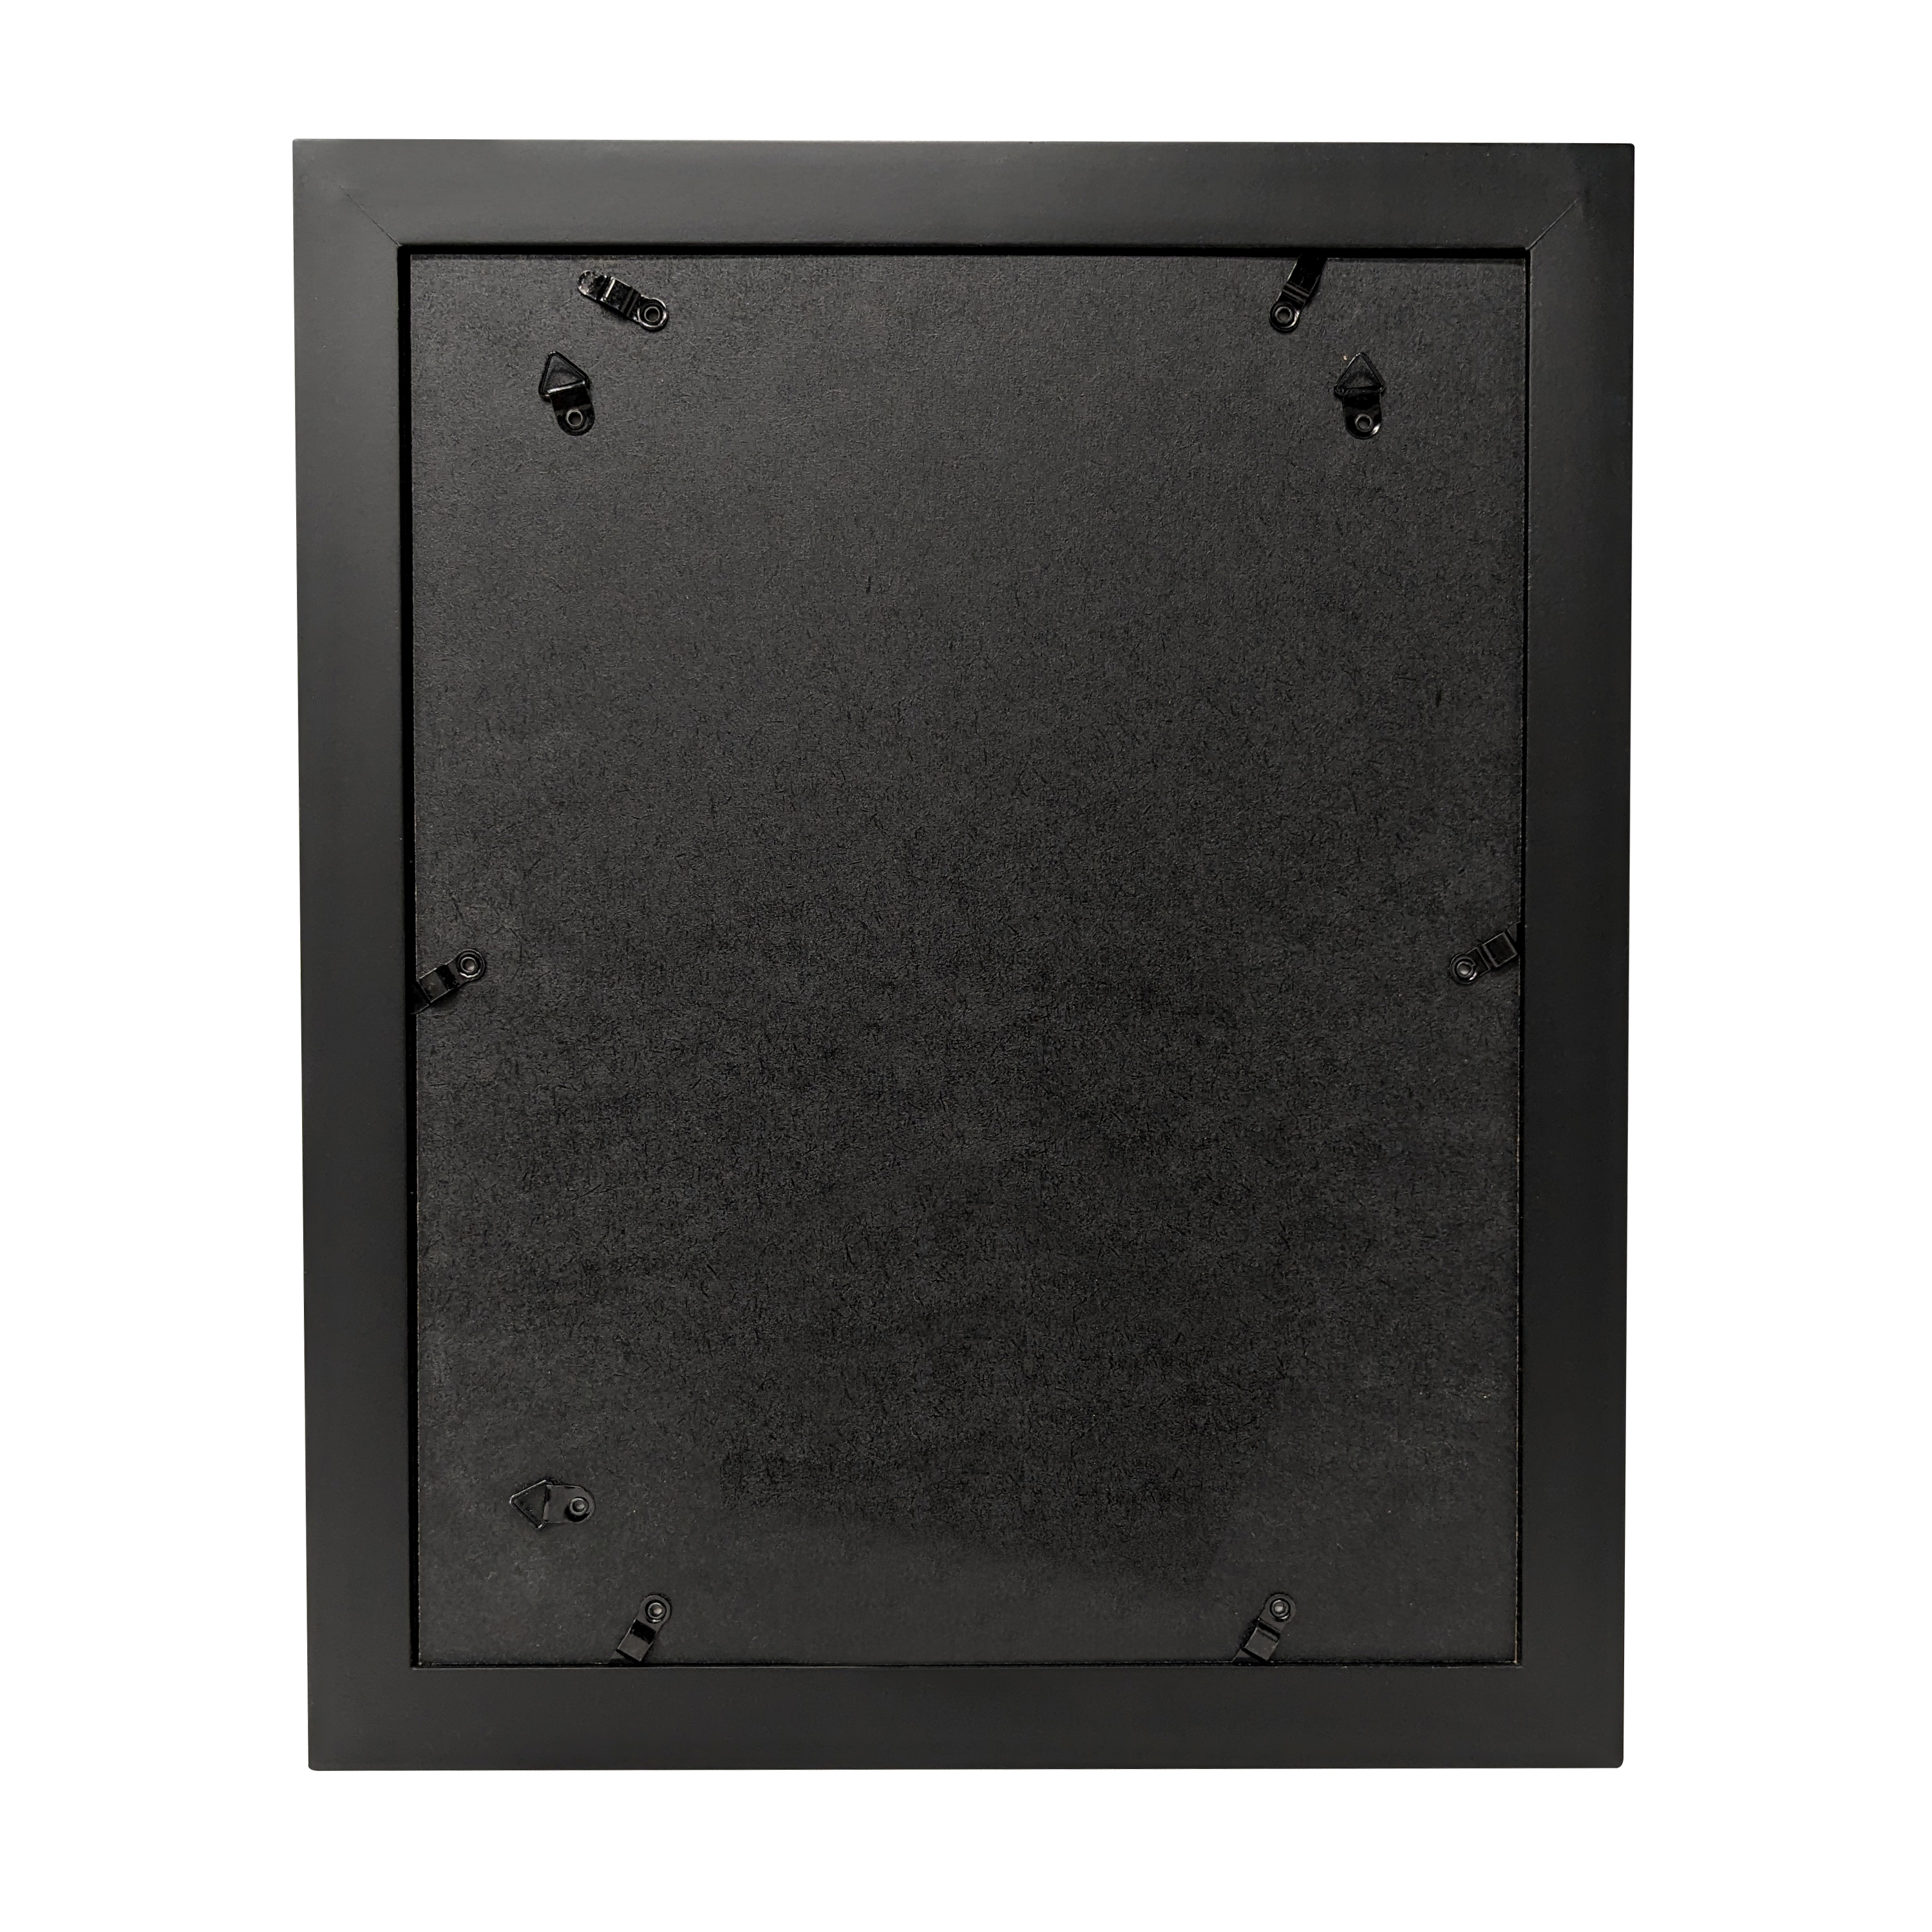 Mainstays 11x14 Matted to 8x10 Wide Beveled Tabletop Picture Frame, Black - image 5 of 7